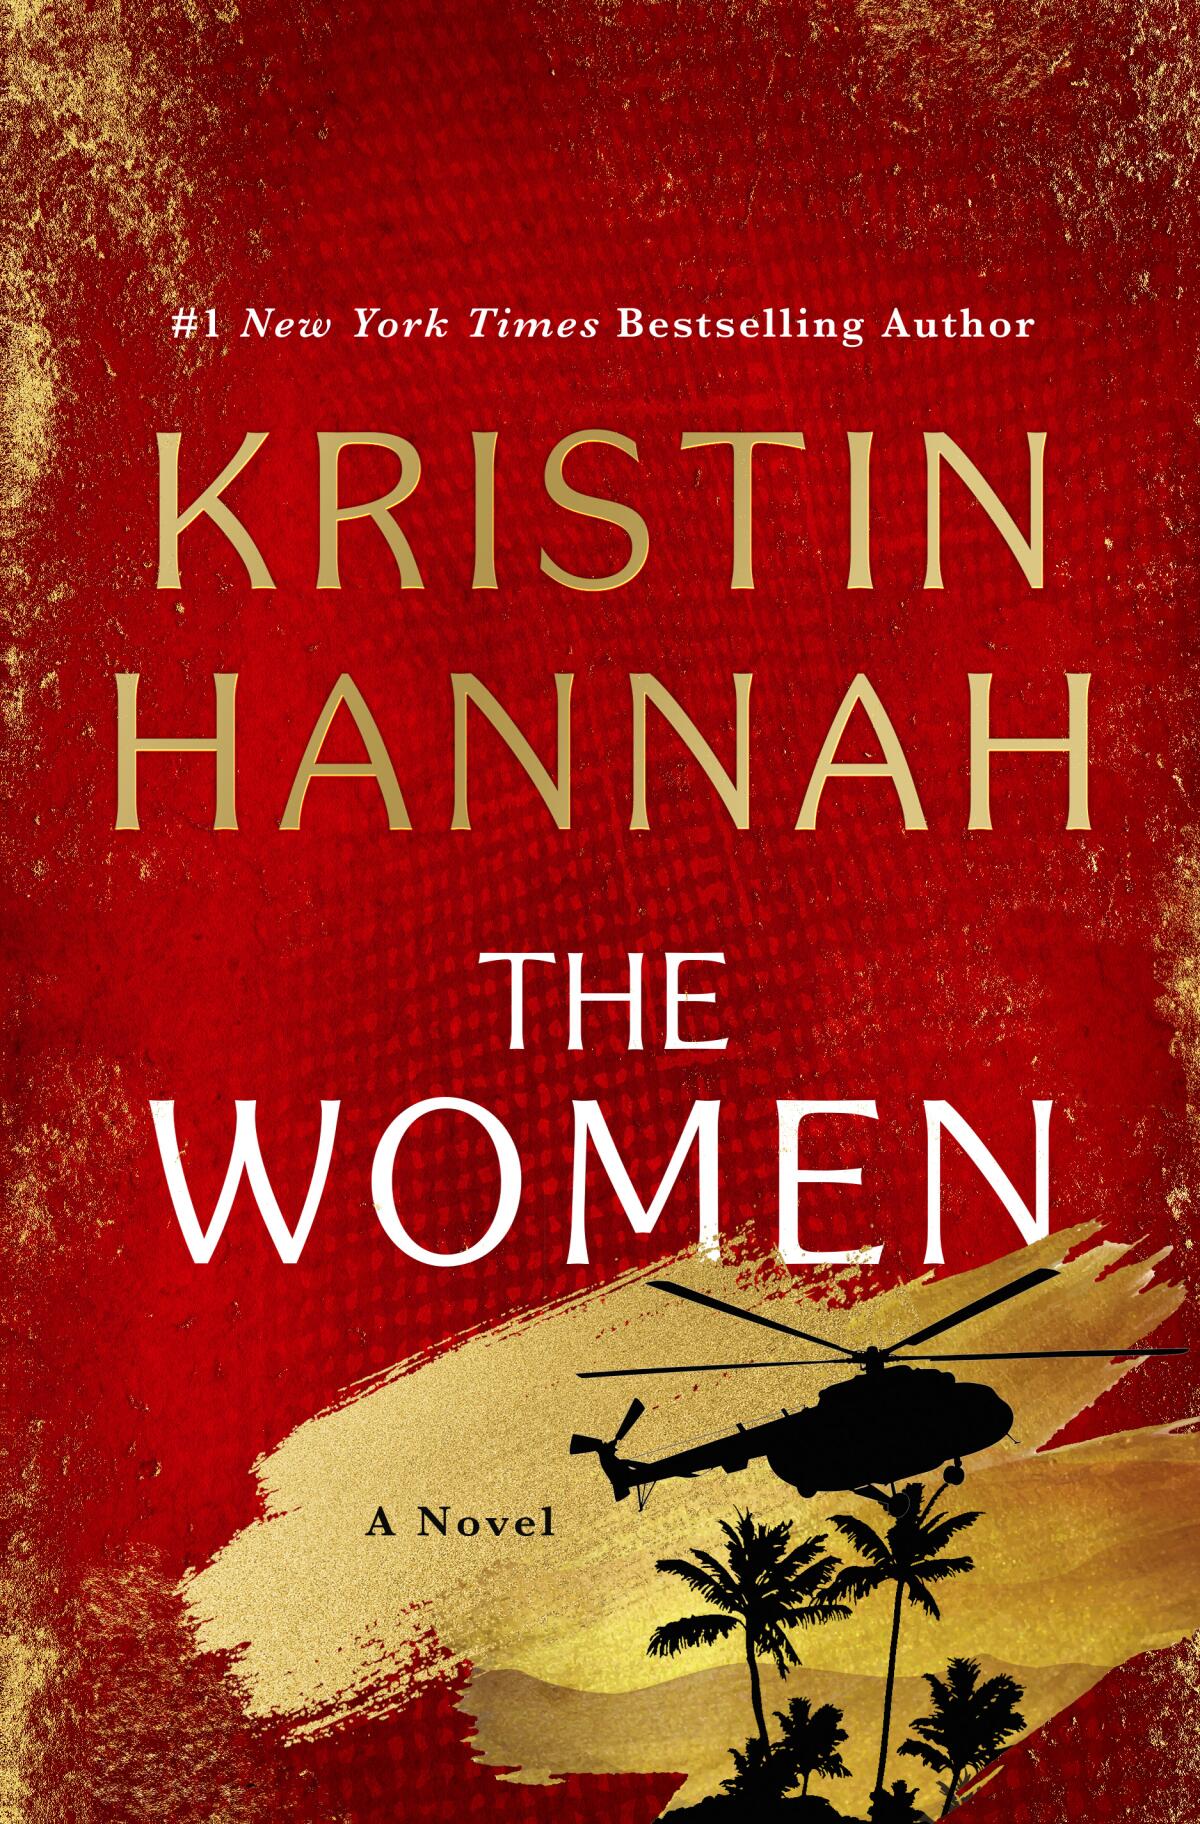 Kristin Hannah's new novel "The Women," published by Martin's Press, comes out Tuesday.